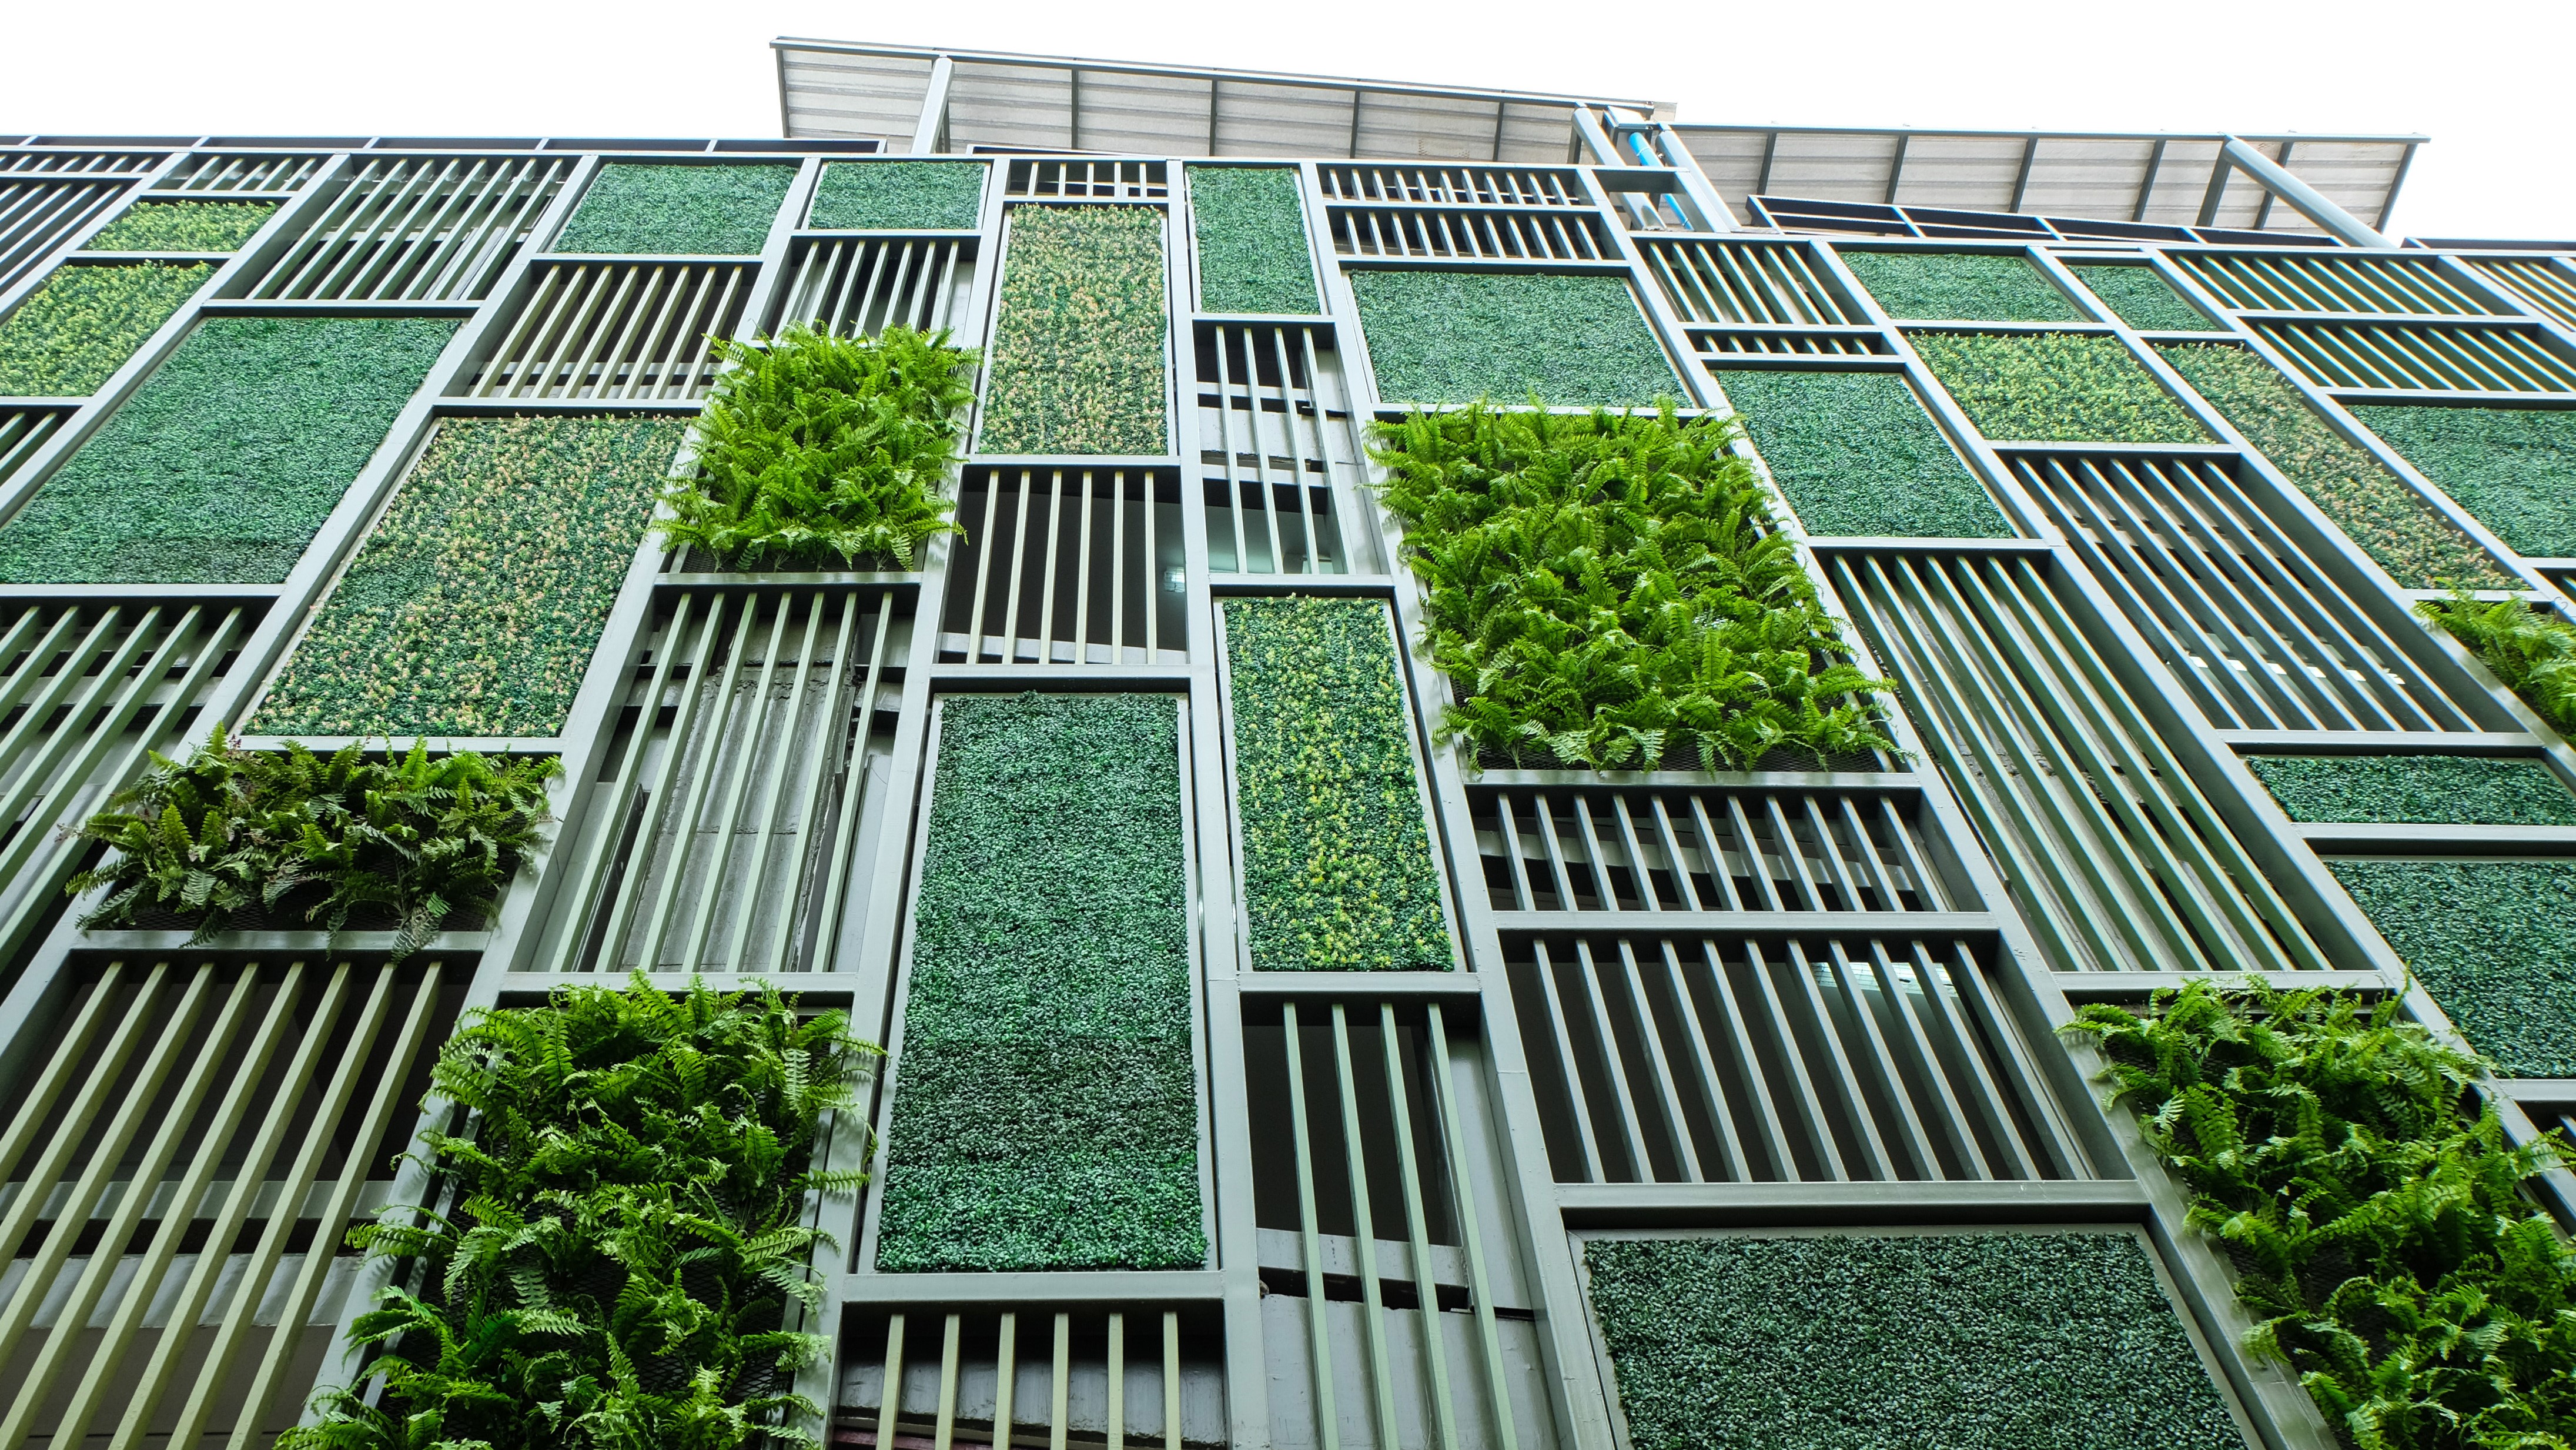 Green facade, vertical garden in architecture. Ecological building. Green architecture; Shutterstock ID 313287029; purchase_order: N/A; job: Net Zero Carbon Building Standard; client: RICS; other: 